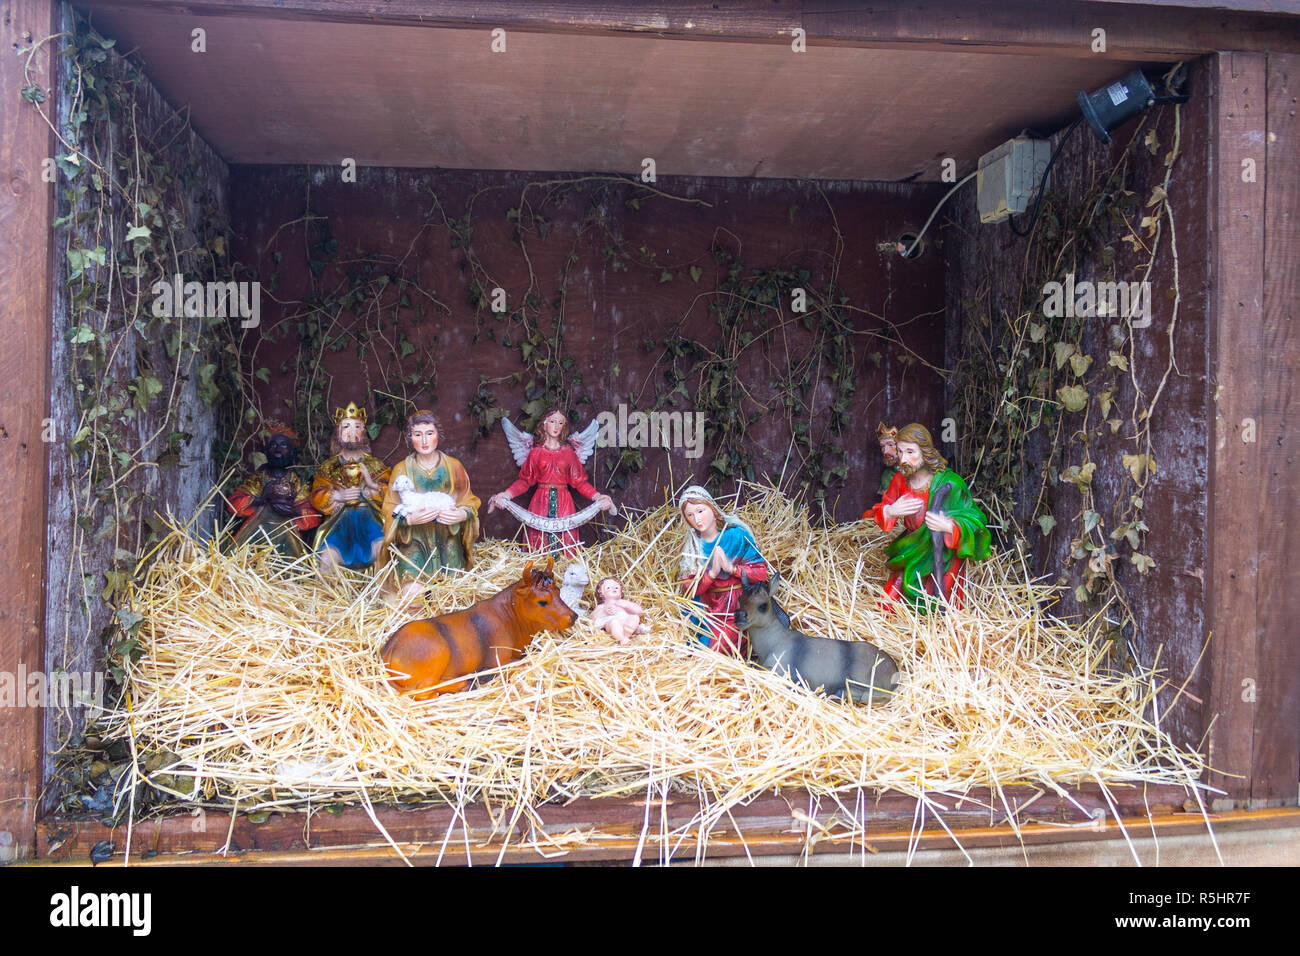 Christmas or nativity scene displayed by the roadside. Stock Photo